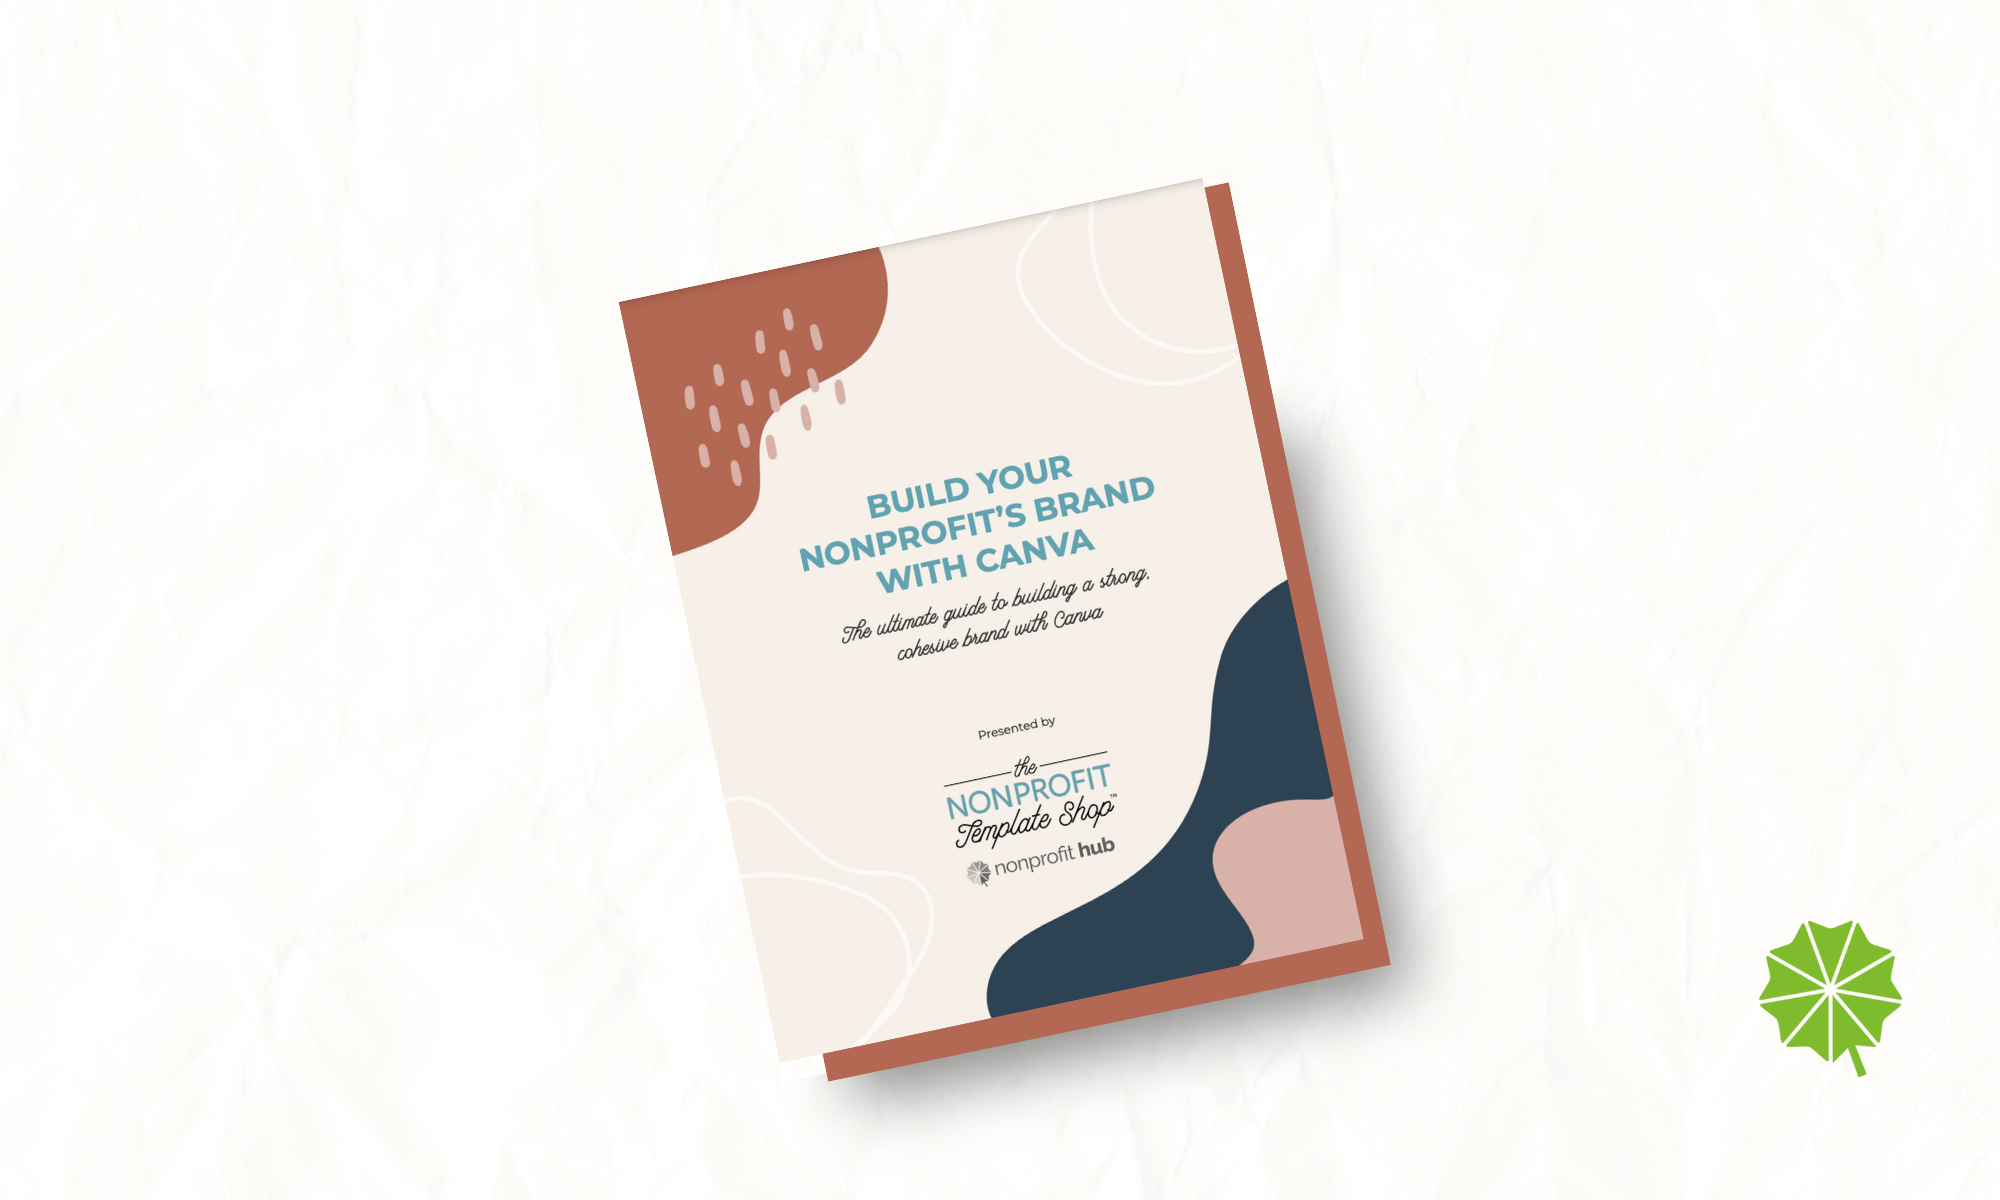 canva for nonprofits guide